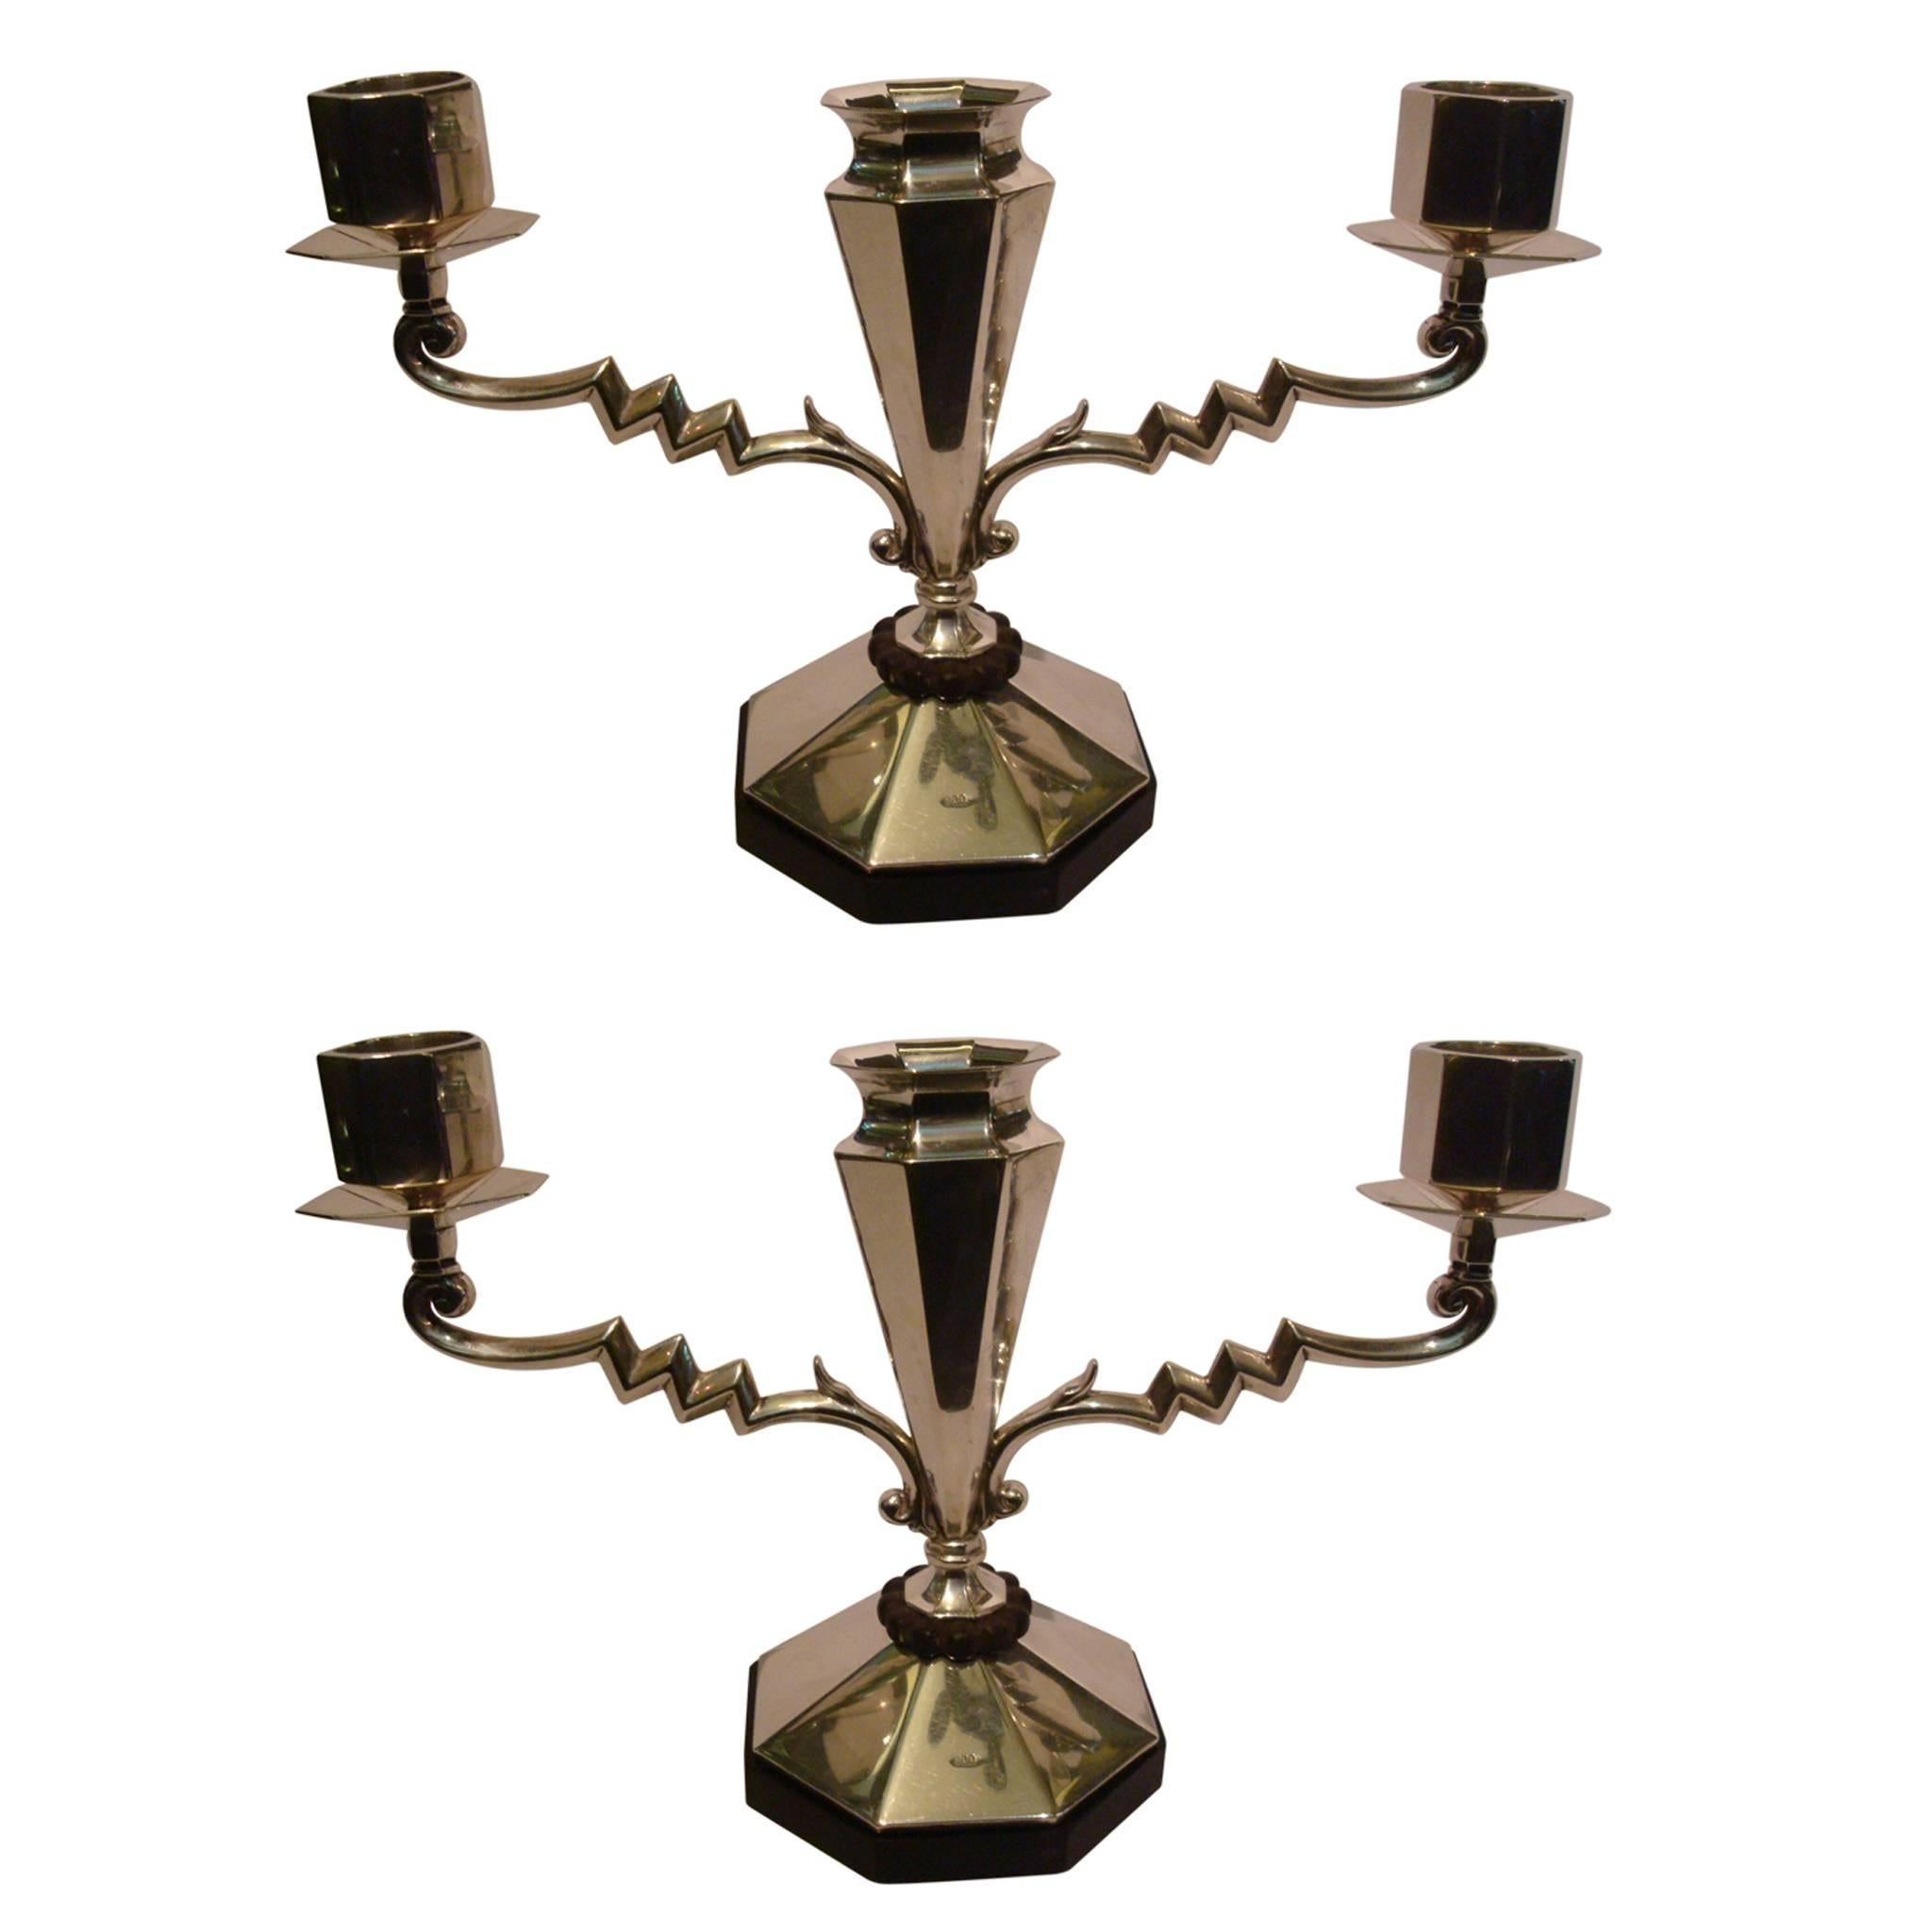 Pair of Art Deco Silver Candleholders with Flower Vase in the Middle